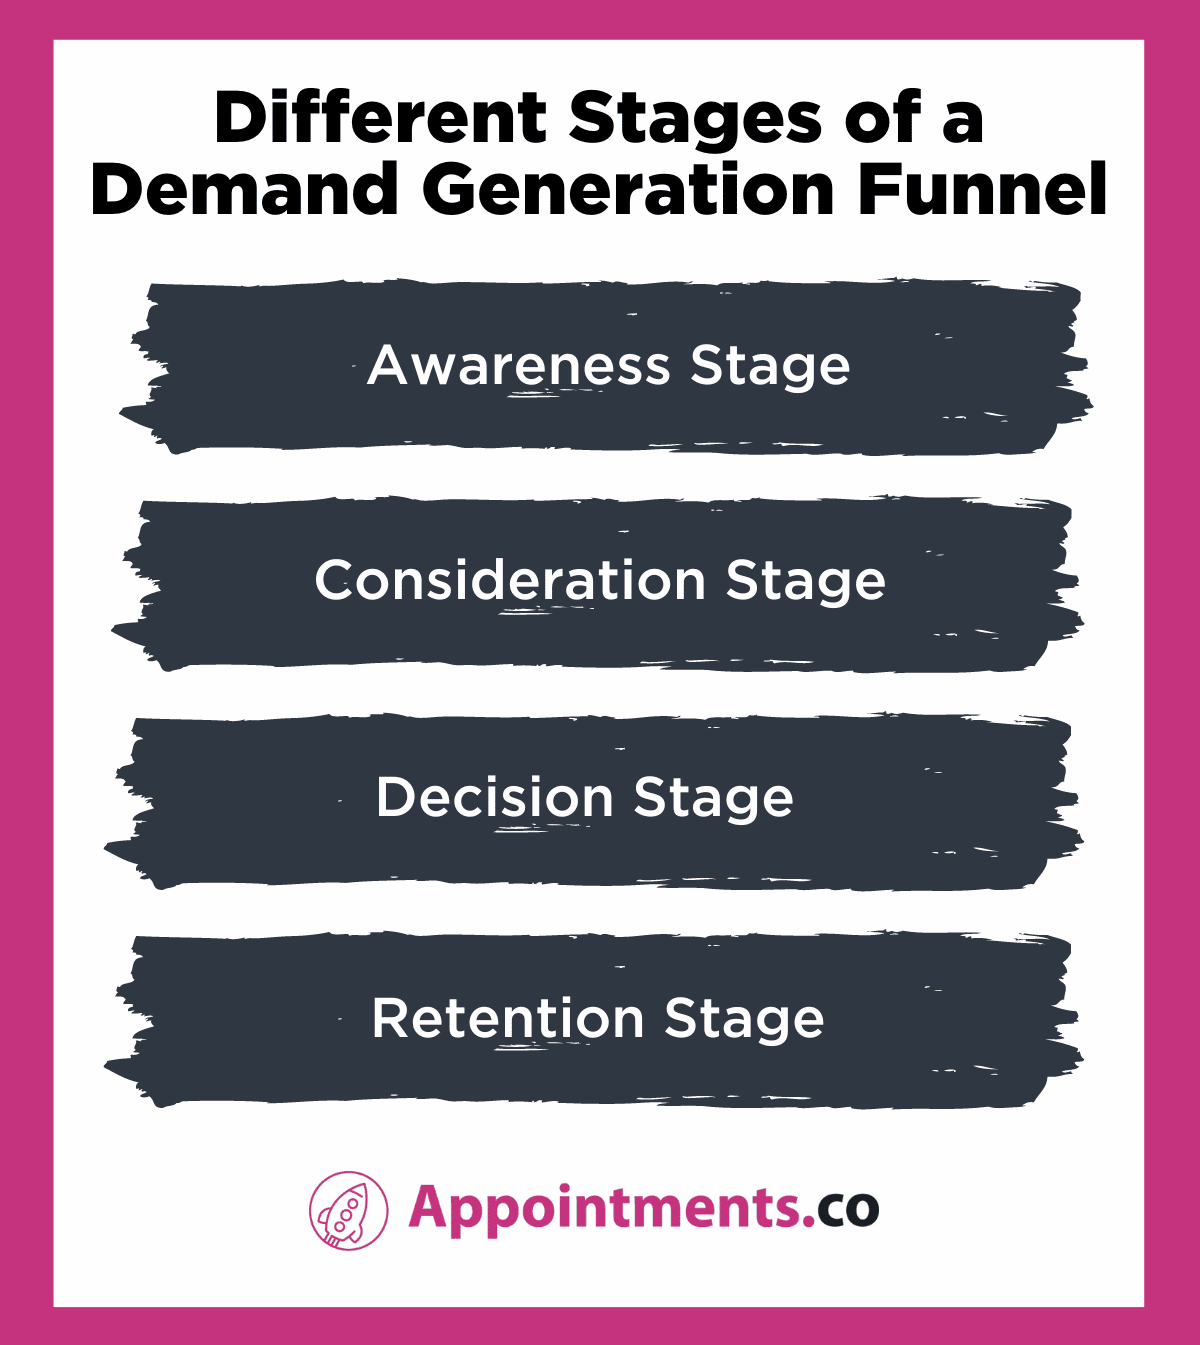 Different Stages of a Demand Generation Funnel